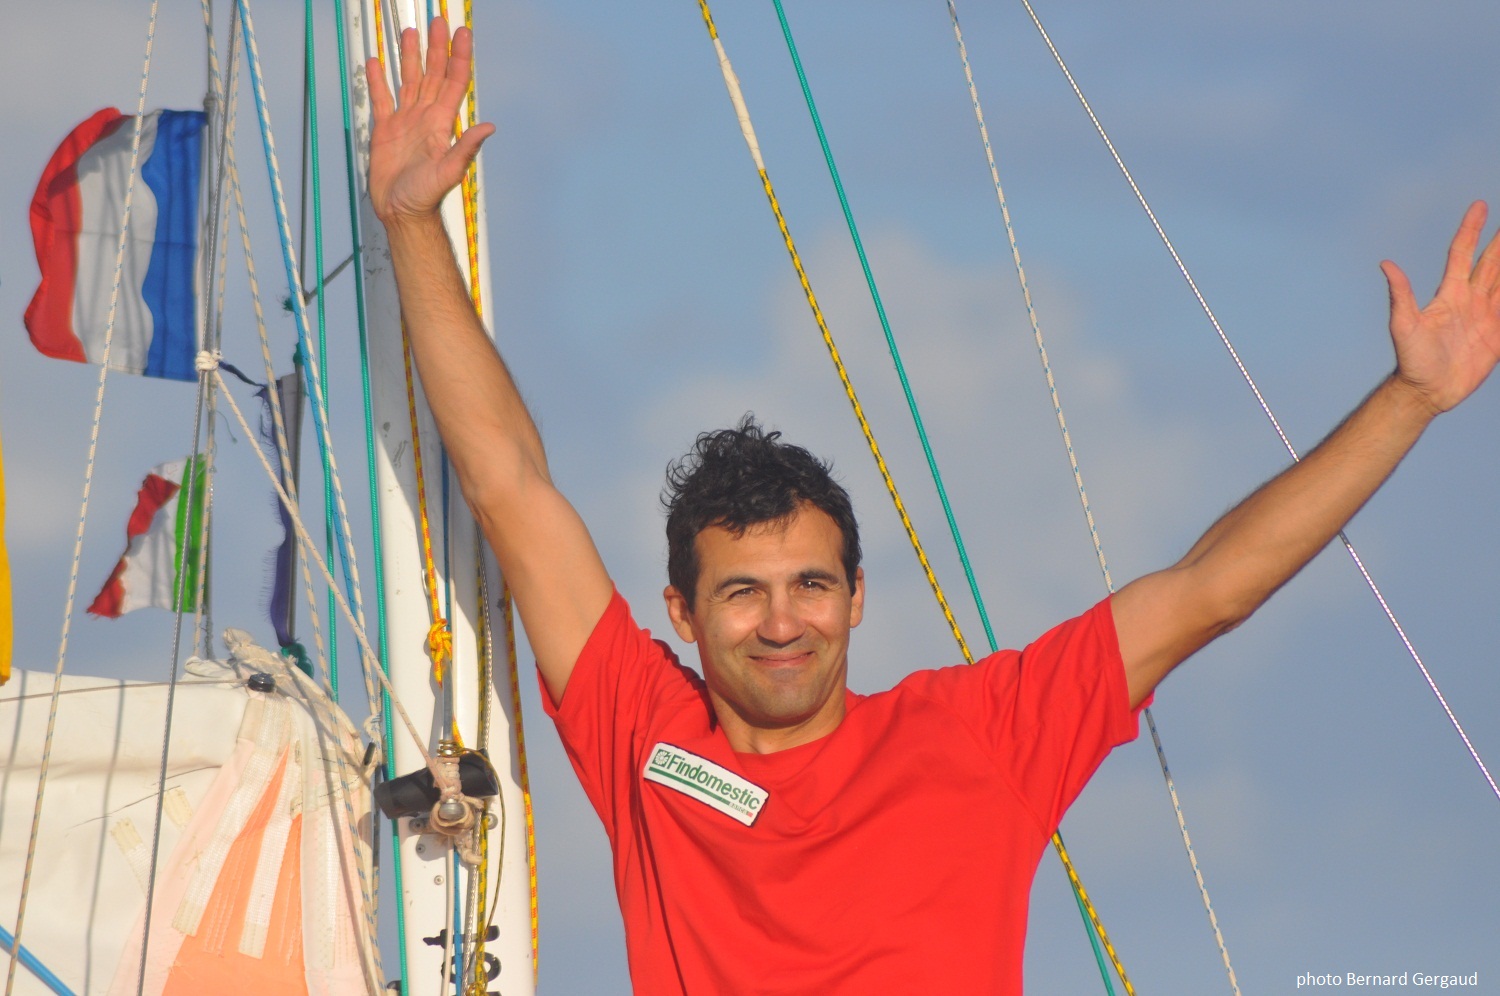 Alessandro arrived at Les Sables july, 22 after 268d 19h 36' 12" around the globe.